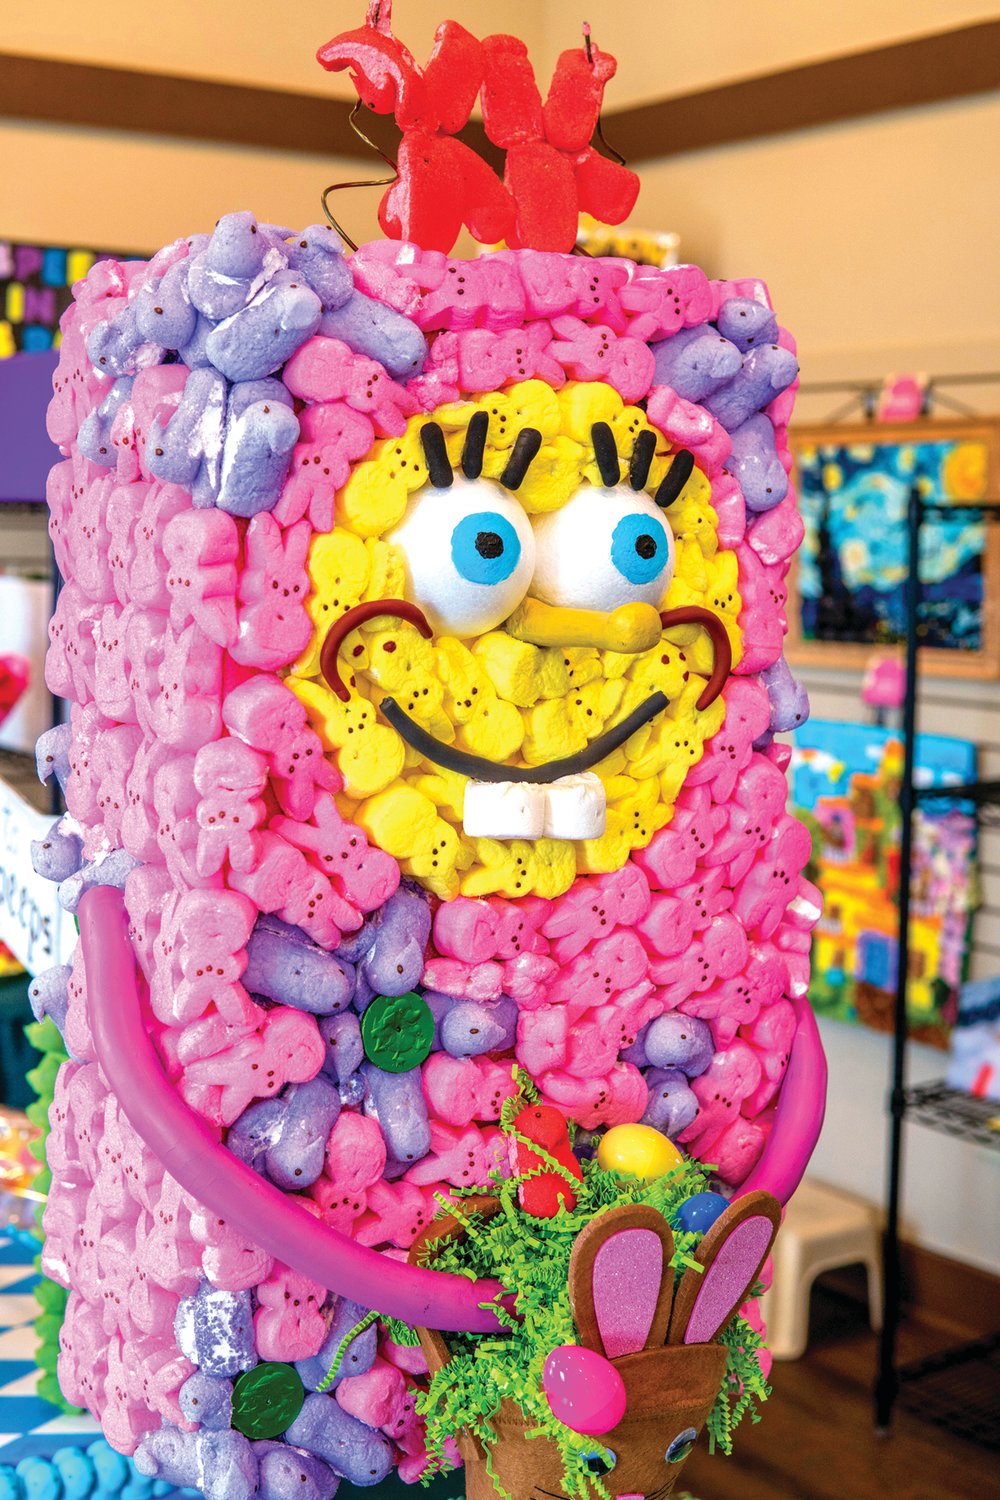 PEEPS in the Village returns to Peddler’s Village in Lahaska. This colorful entry was among 100 on display in the 2022 event. Entries for 2023 are due by March 3.